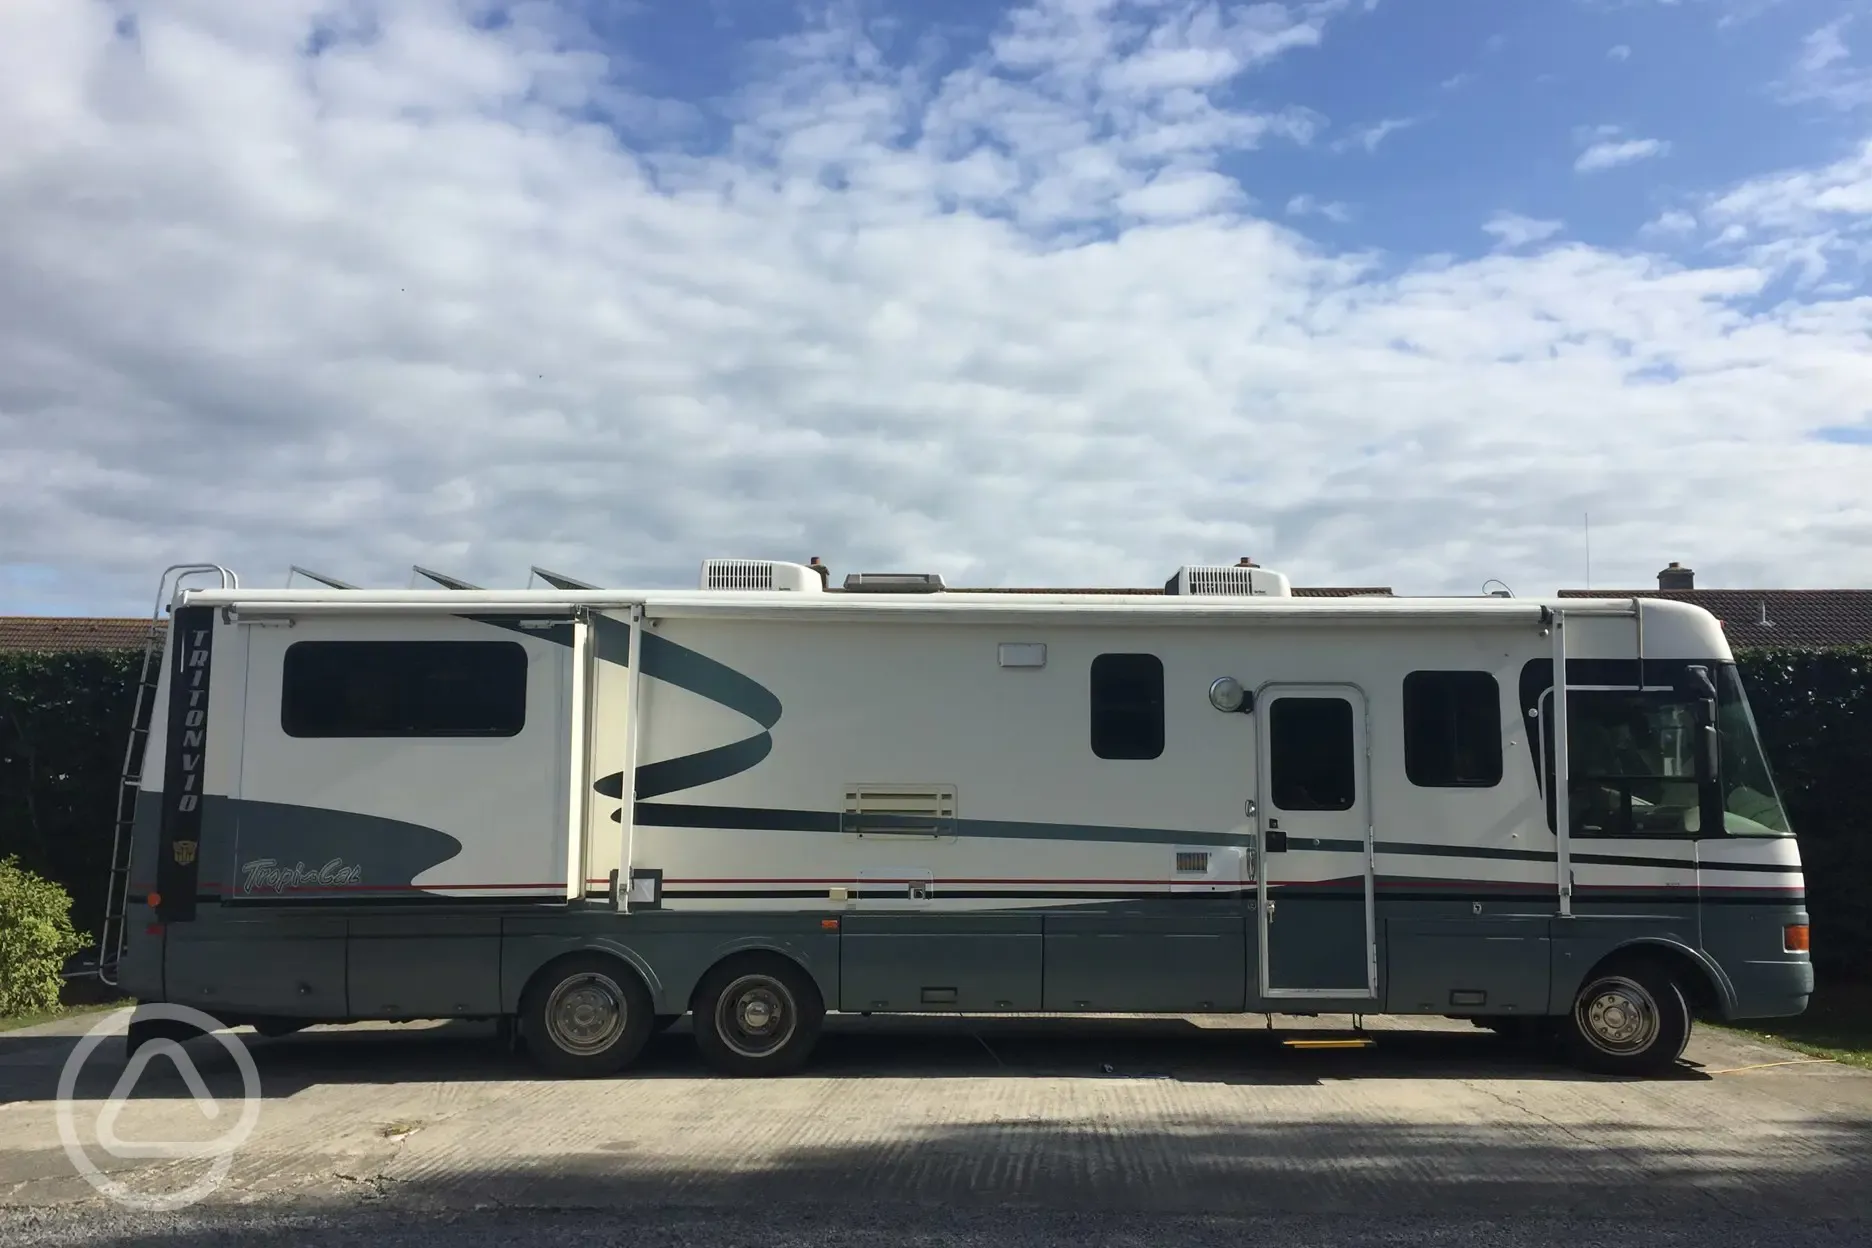 We can easily accommodate RVs of up to 40 feet